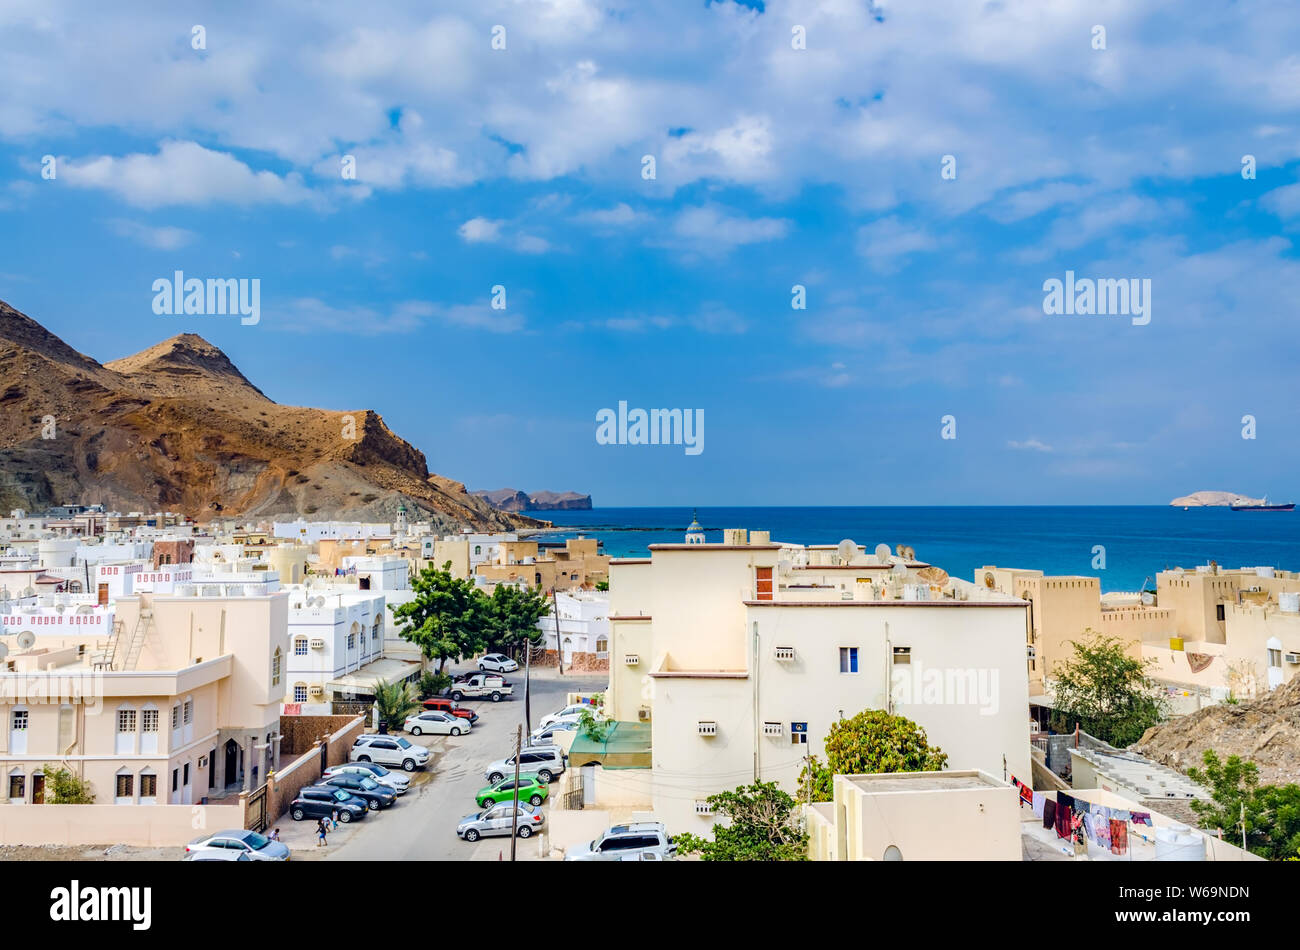 Small, idyllic town at the foot of the hills and near the beach. From Muscat, Oman. Stock Photo